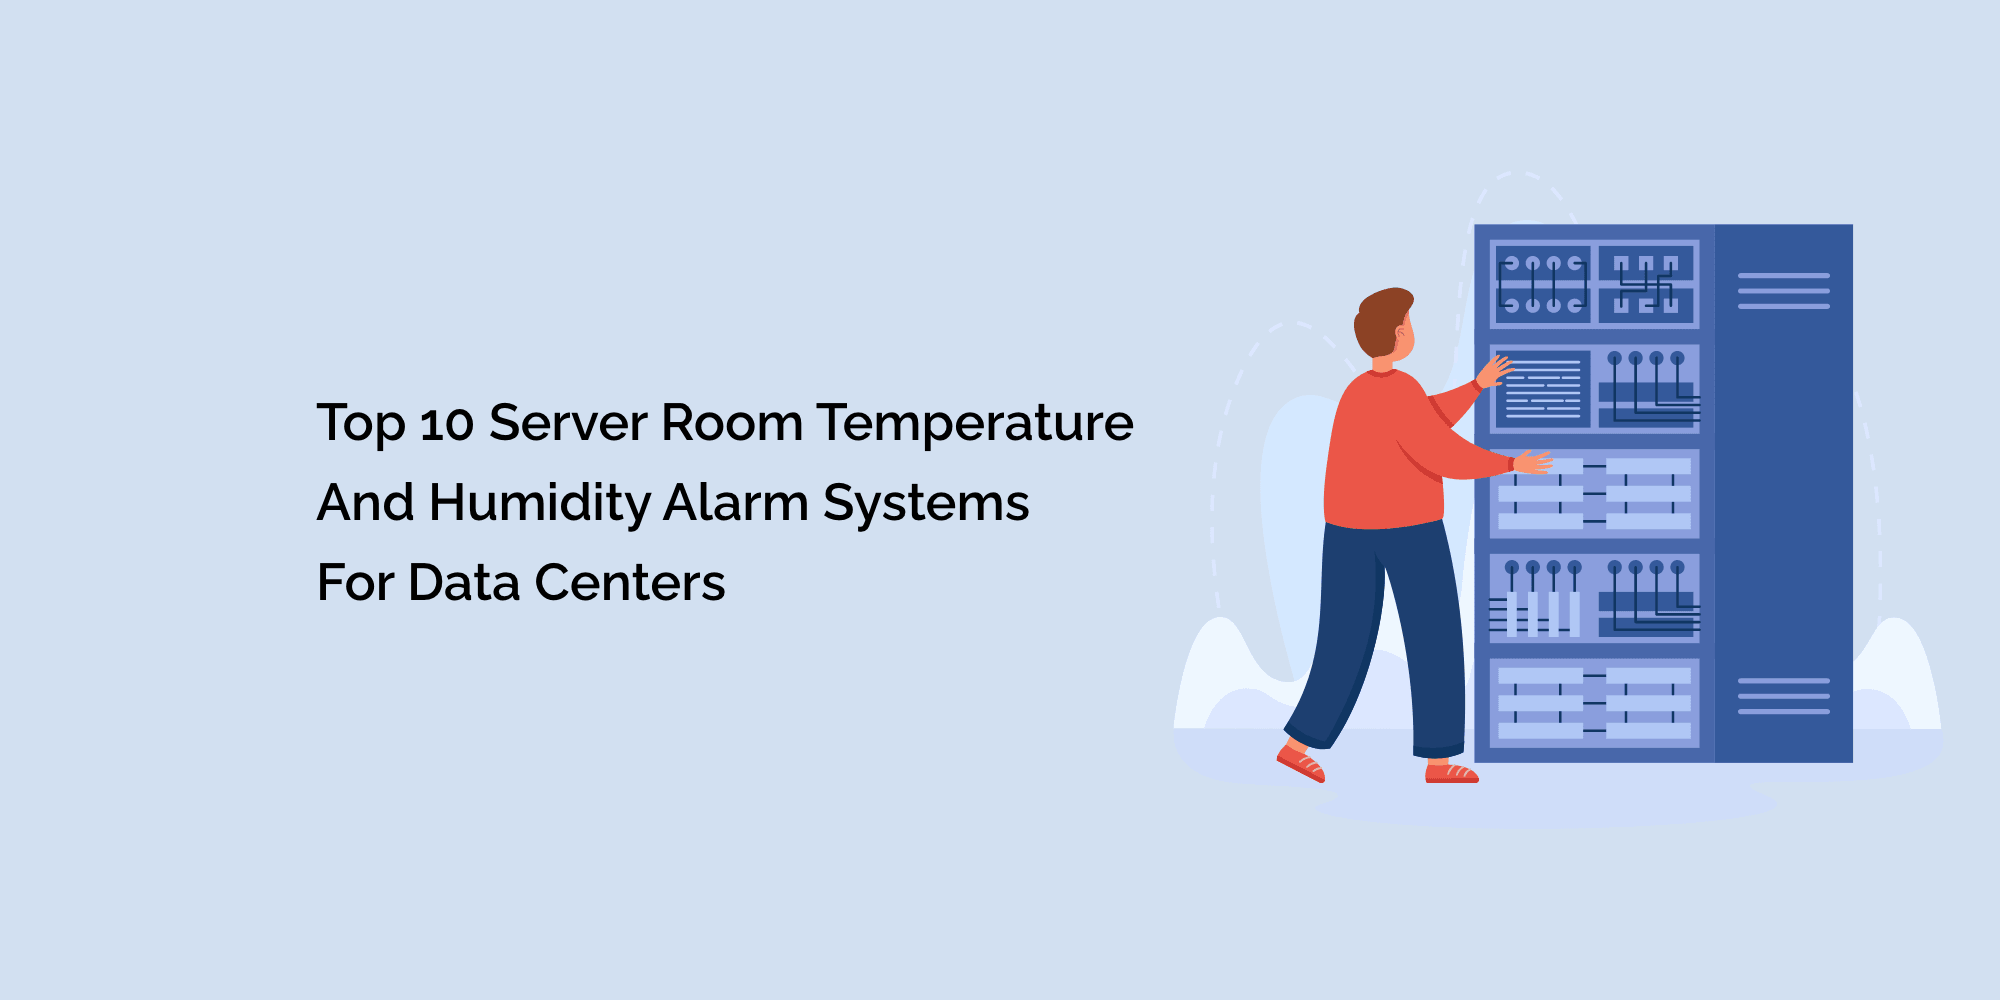 Top 10 Server Room Temperature and Humidity Alarm Systems for Data Centers